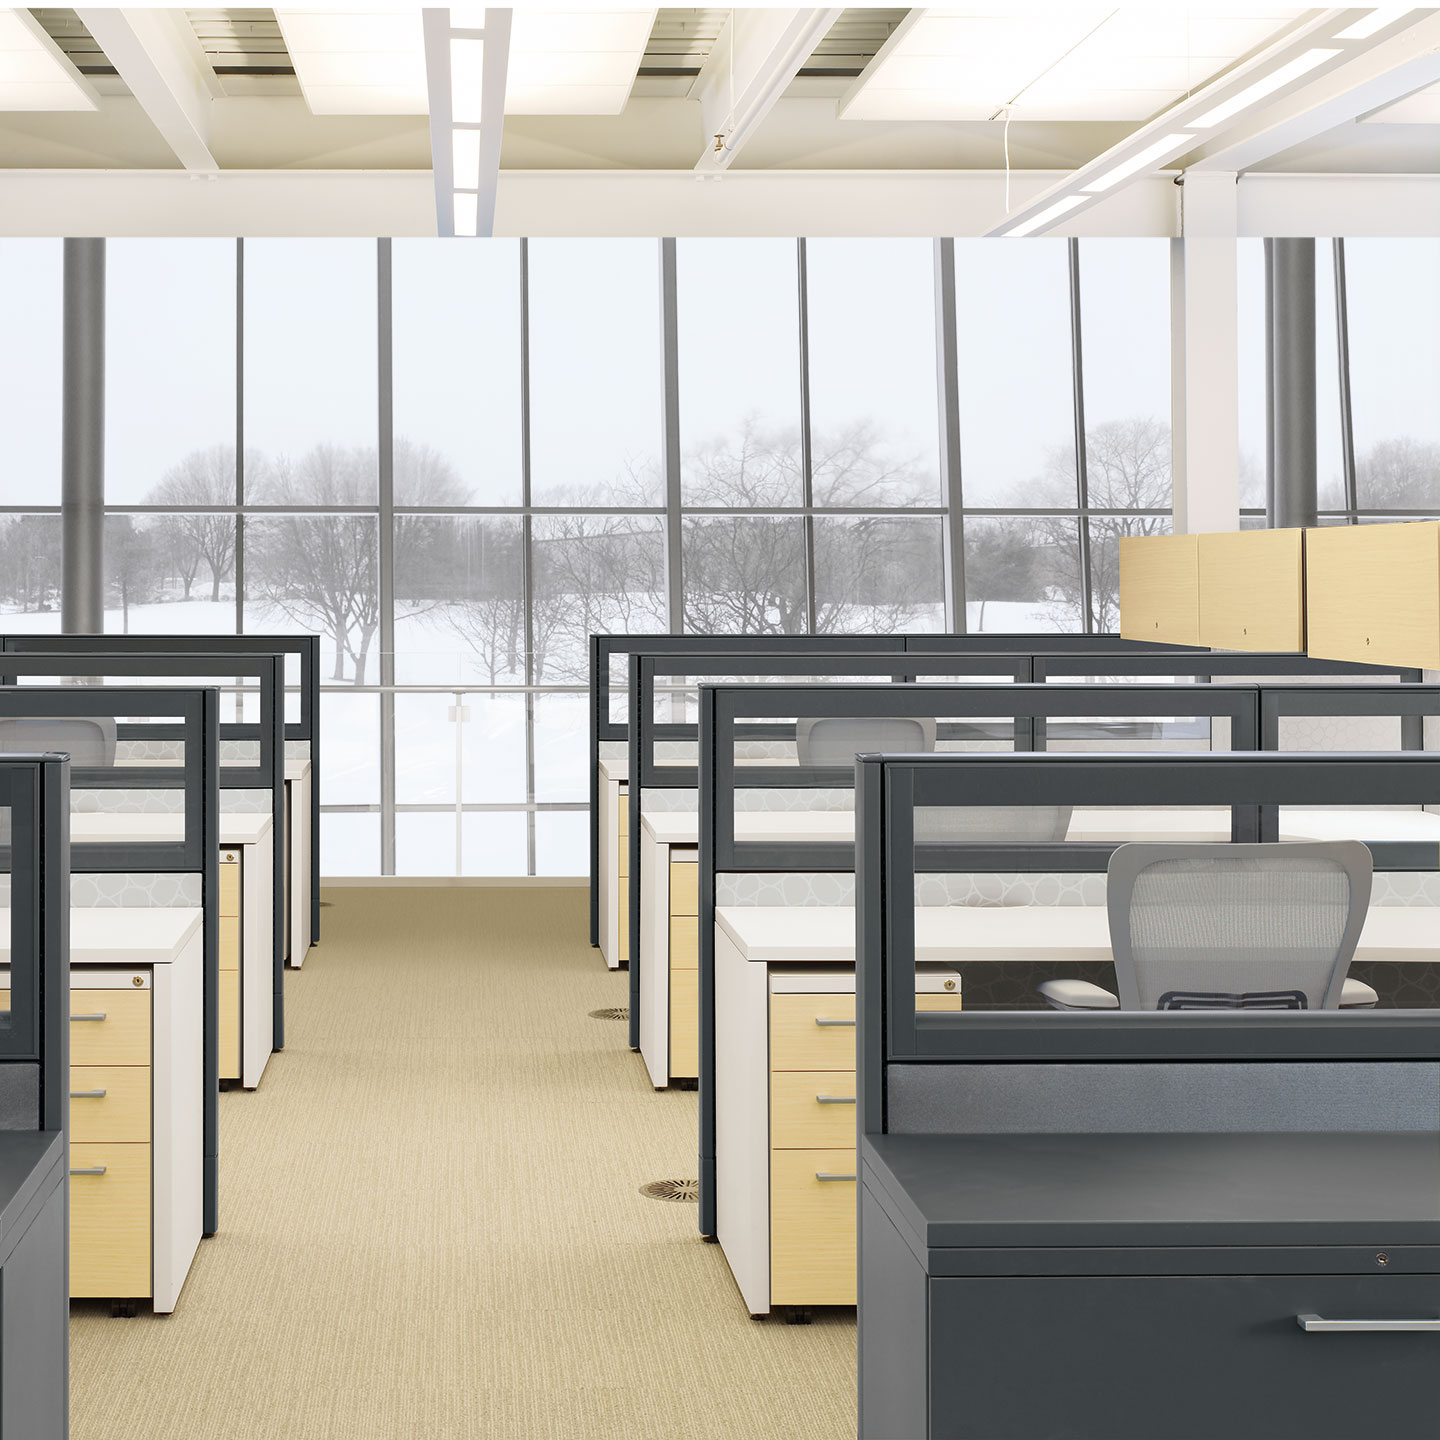 Haworth Premise Workspace in office space with dividers for privacy and storage shelves next to chairs